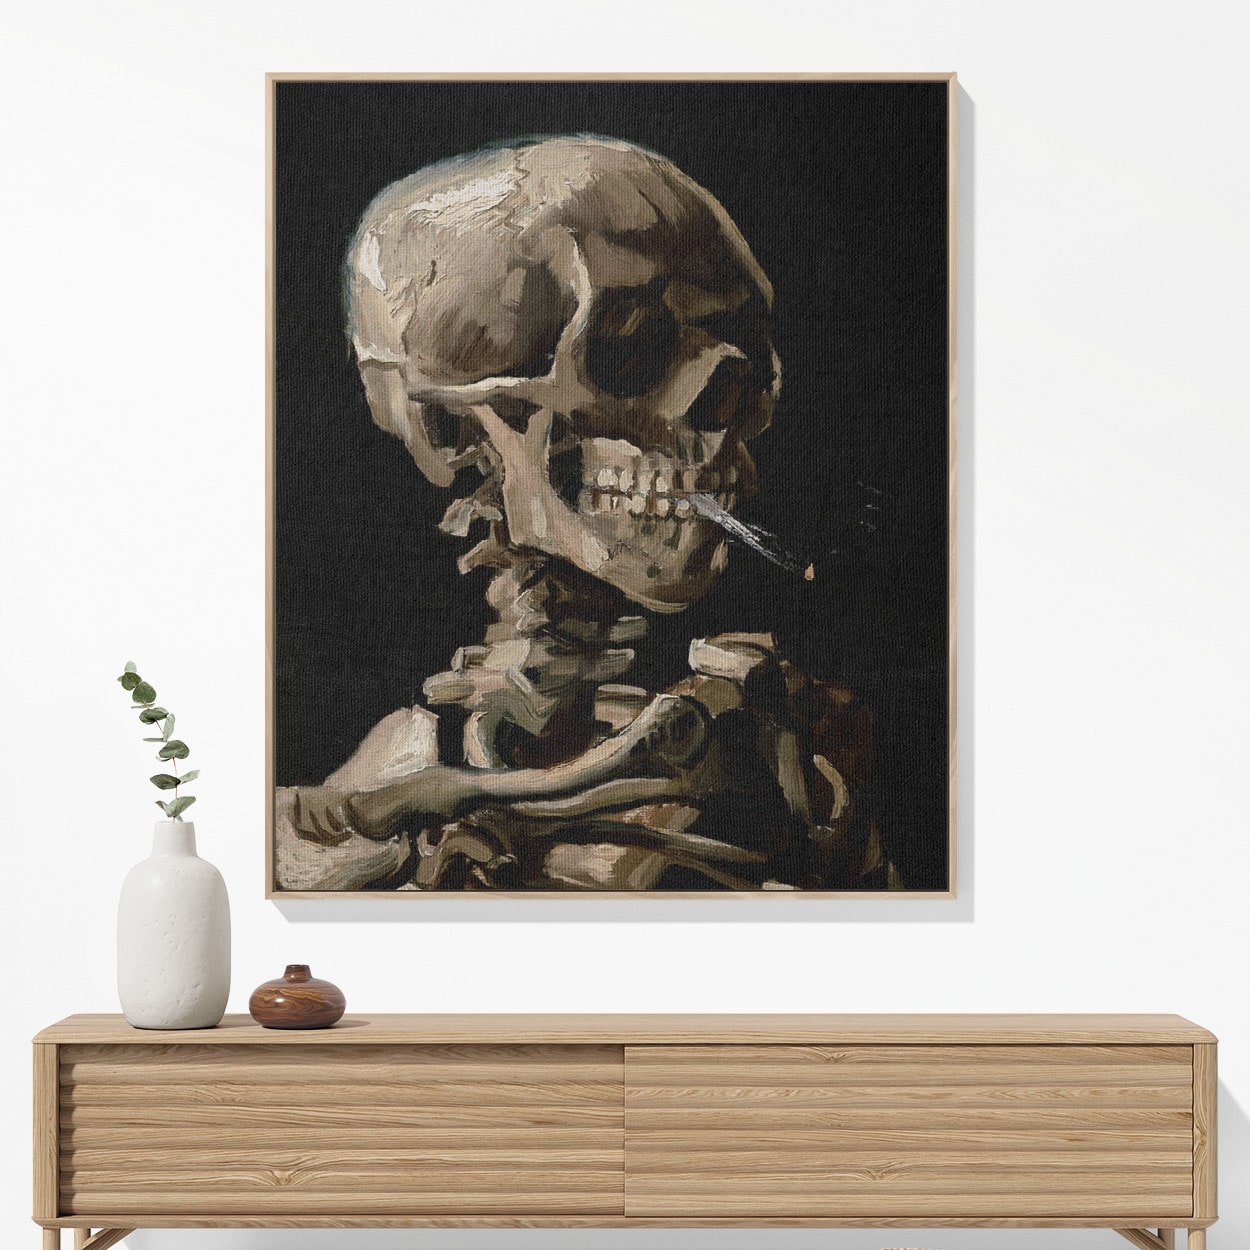 Famous Skull Woven Blanket Woven Blanket Hanging on a Wall as Framed Wall Art